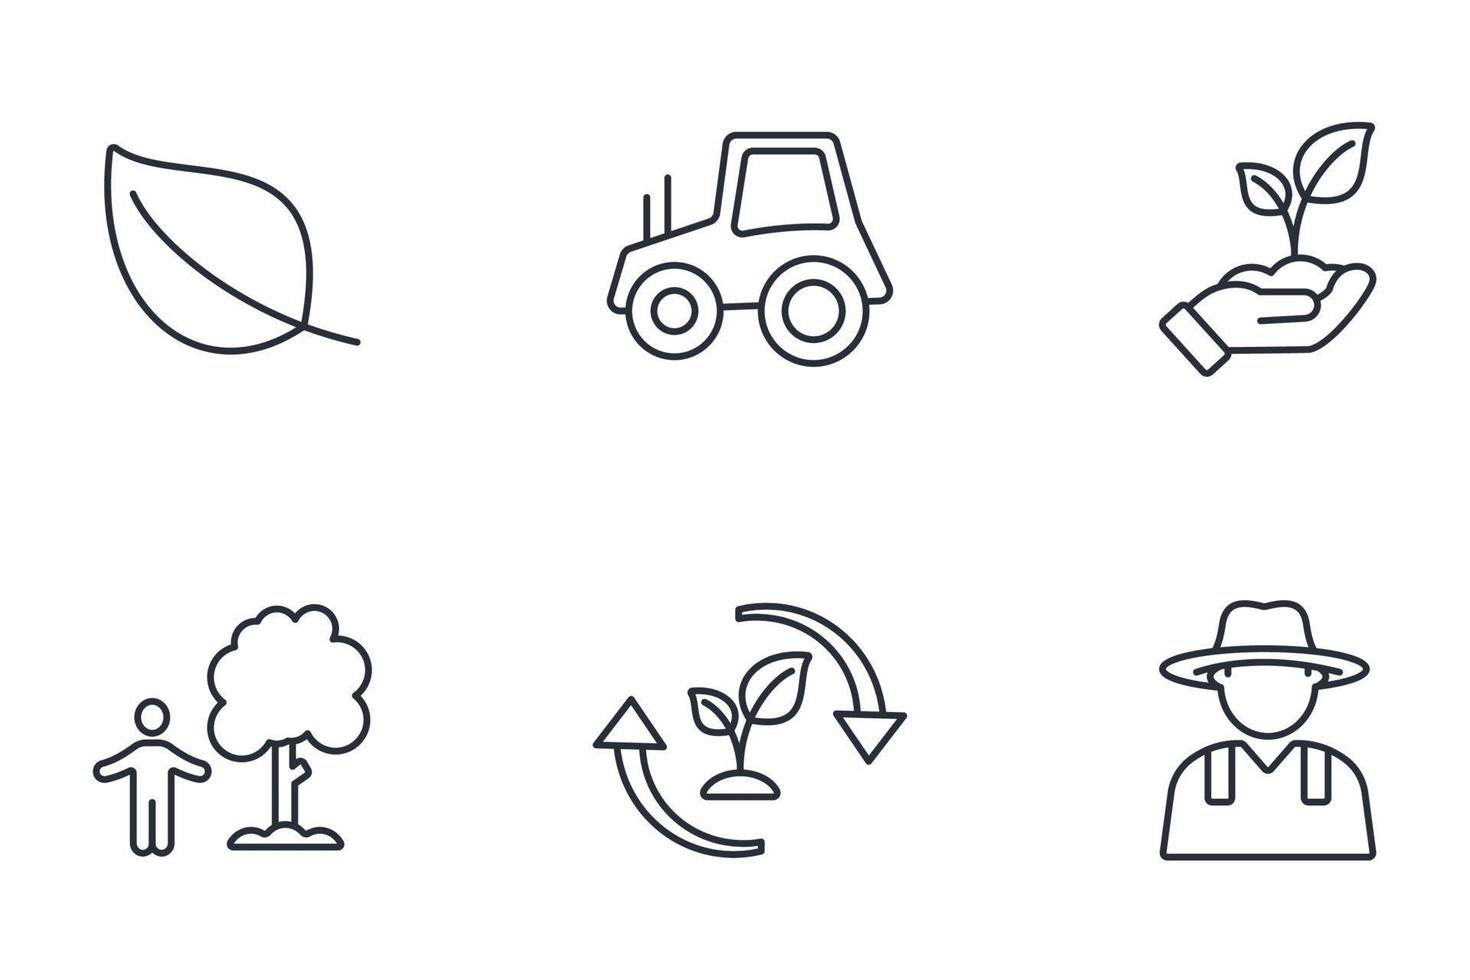 Permaculture icons set . Permaculture pack symbol vector elements for infographic web